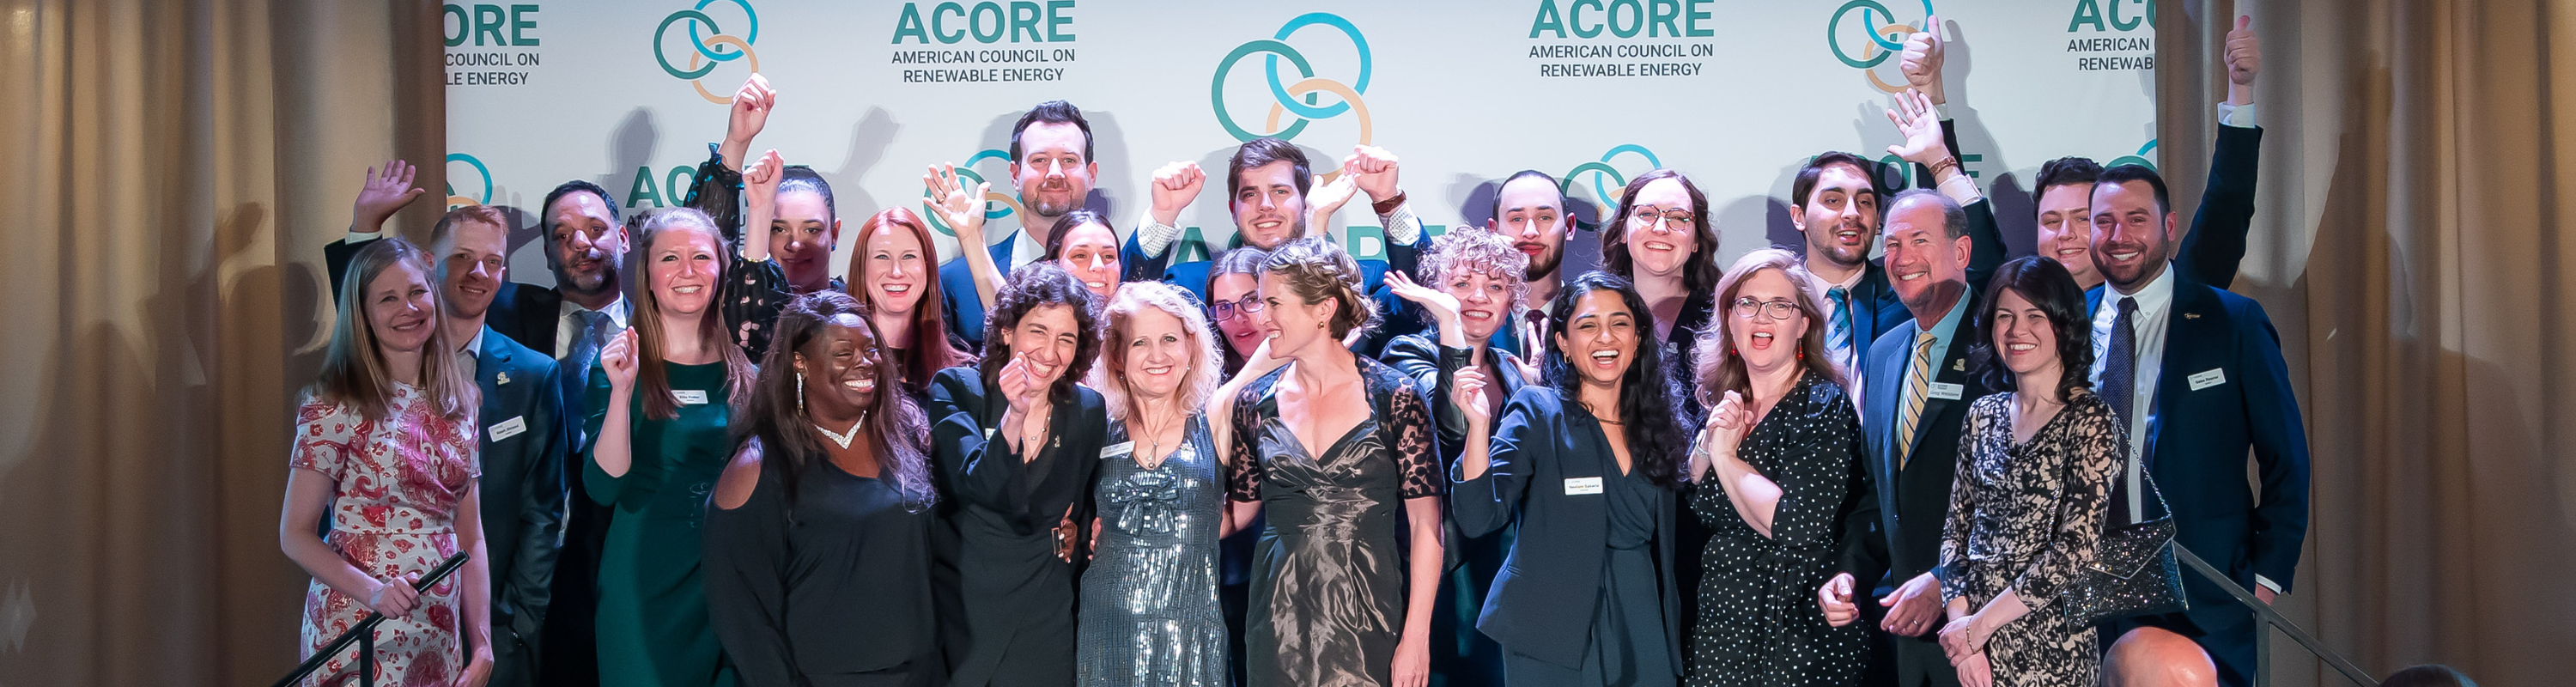 Members of ACORE's team laugh and pose on the stage during the ACORE Gala